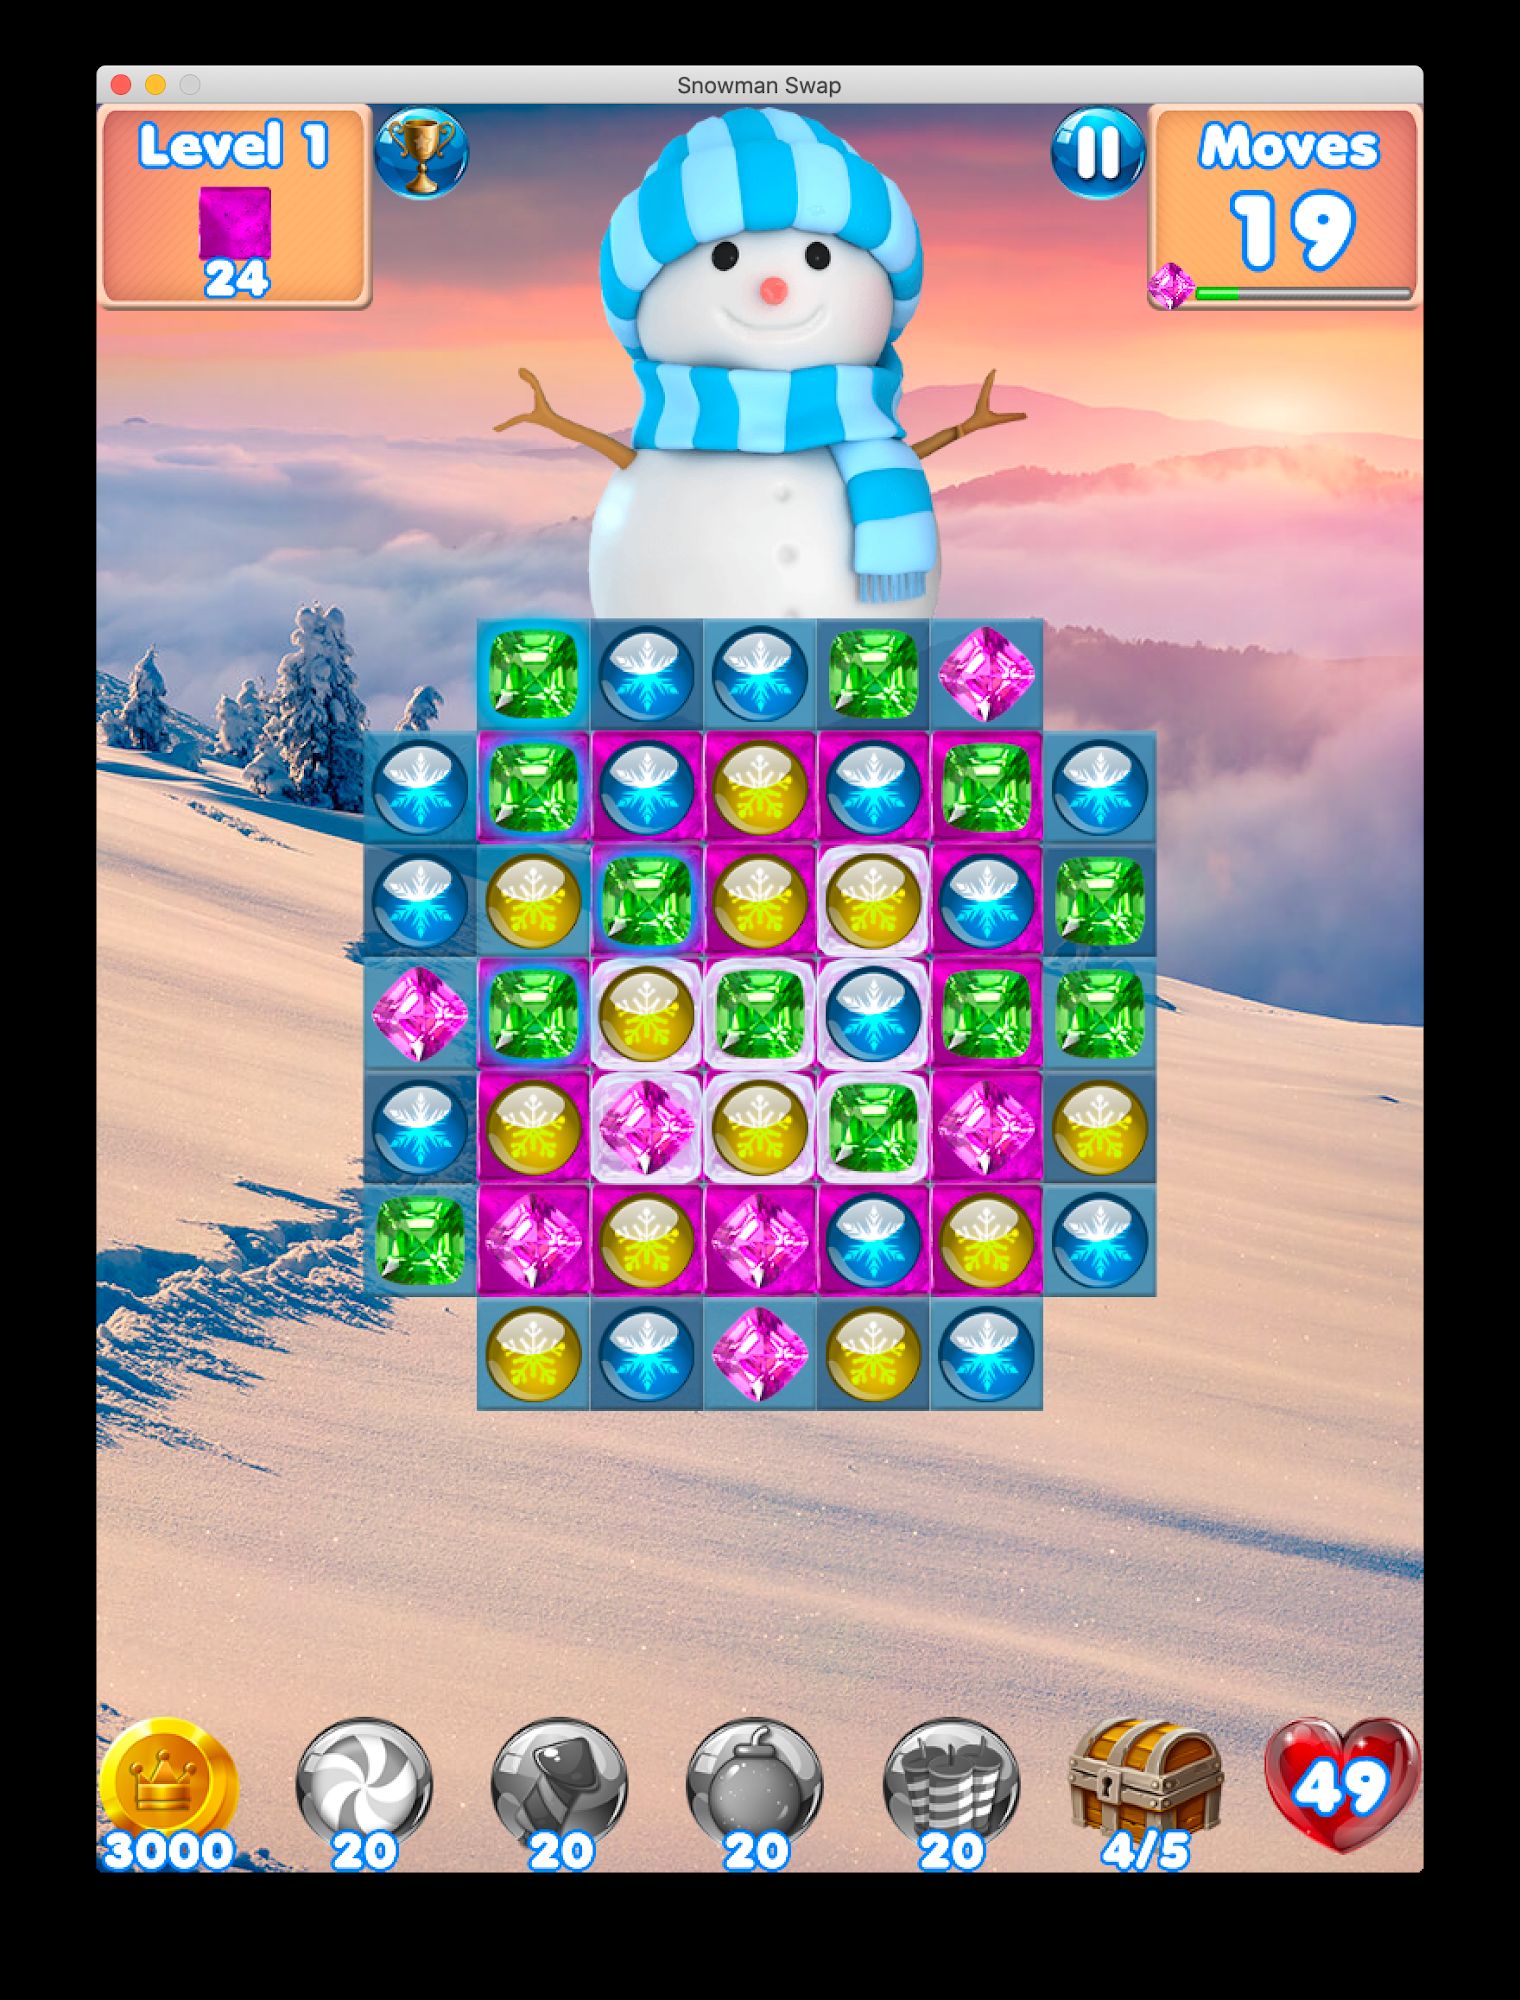 Download Snowman Swap - match 3 games and Christmas Games Android free game.